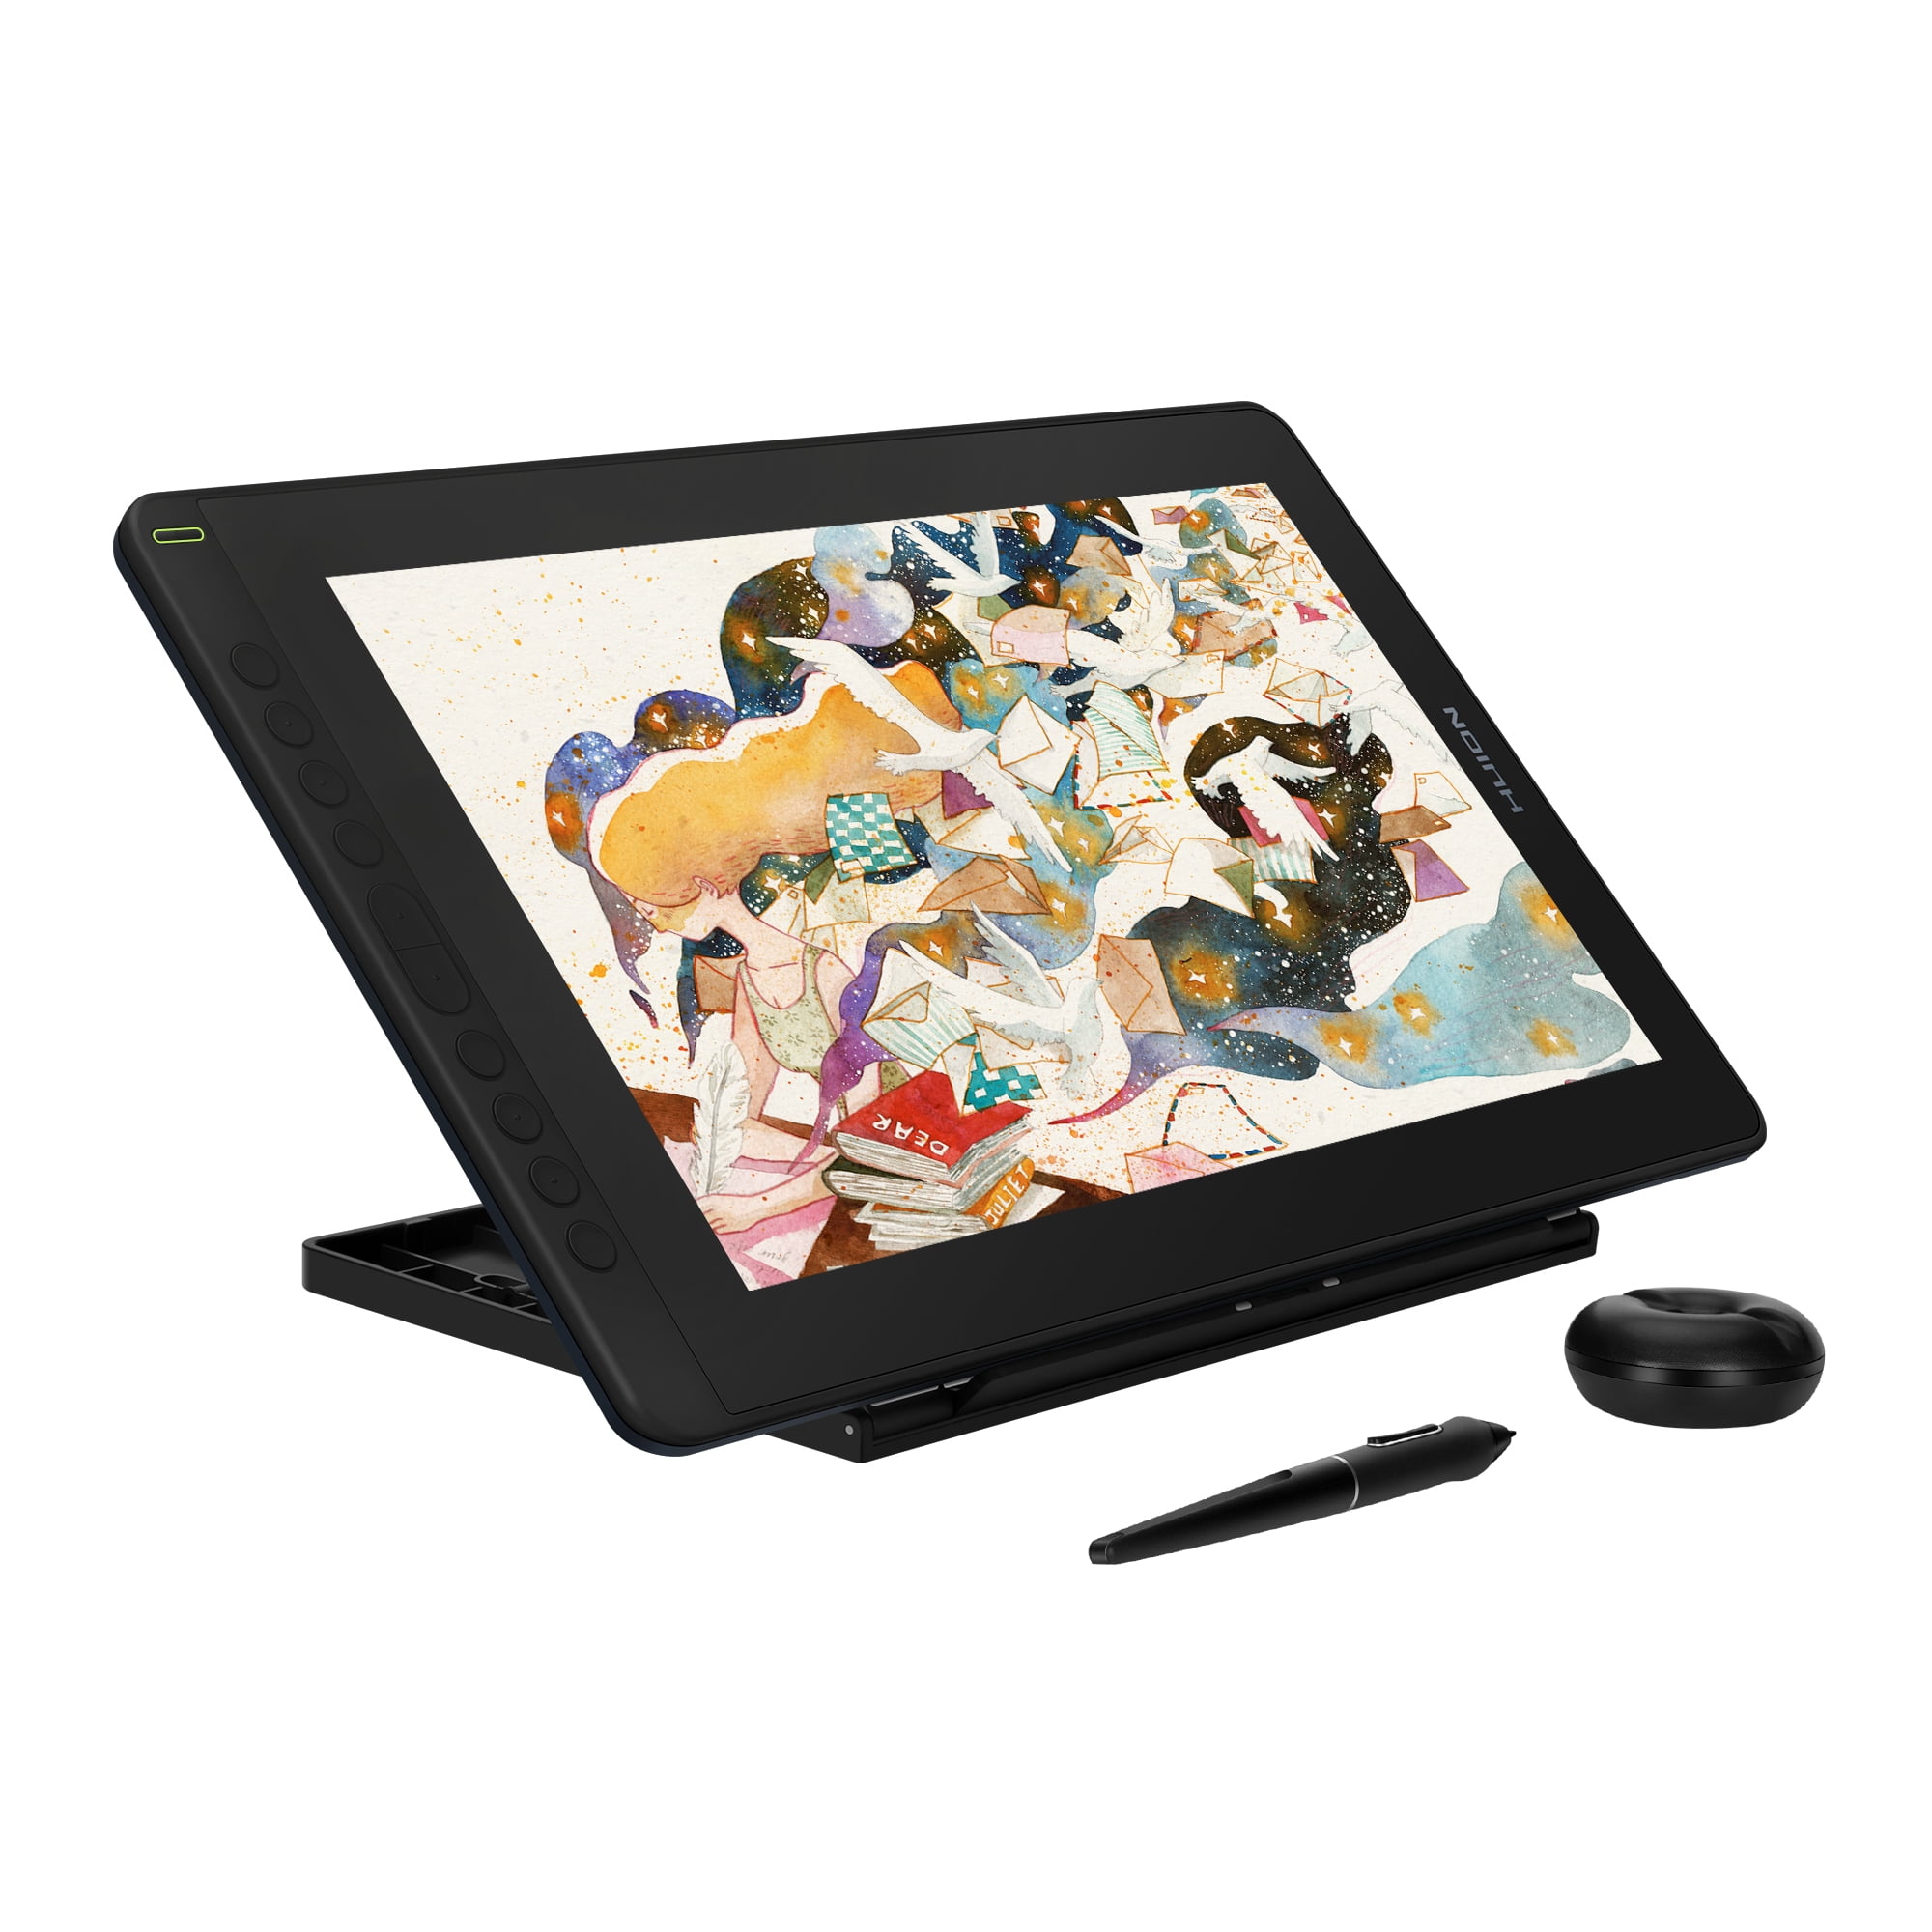 fokus Detektiv gnier HUION KAMVAS 16 with Stand Graphics Drawing Tablet Display 15.6inch, USB-C  to USB-C cable included - Walmart.com